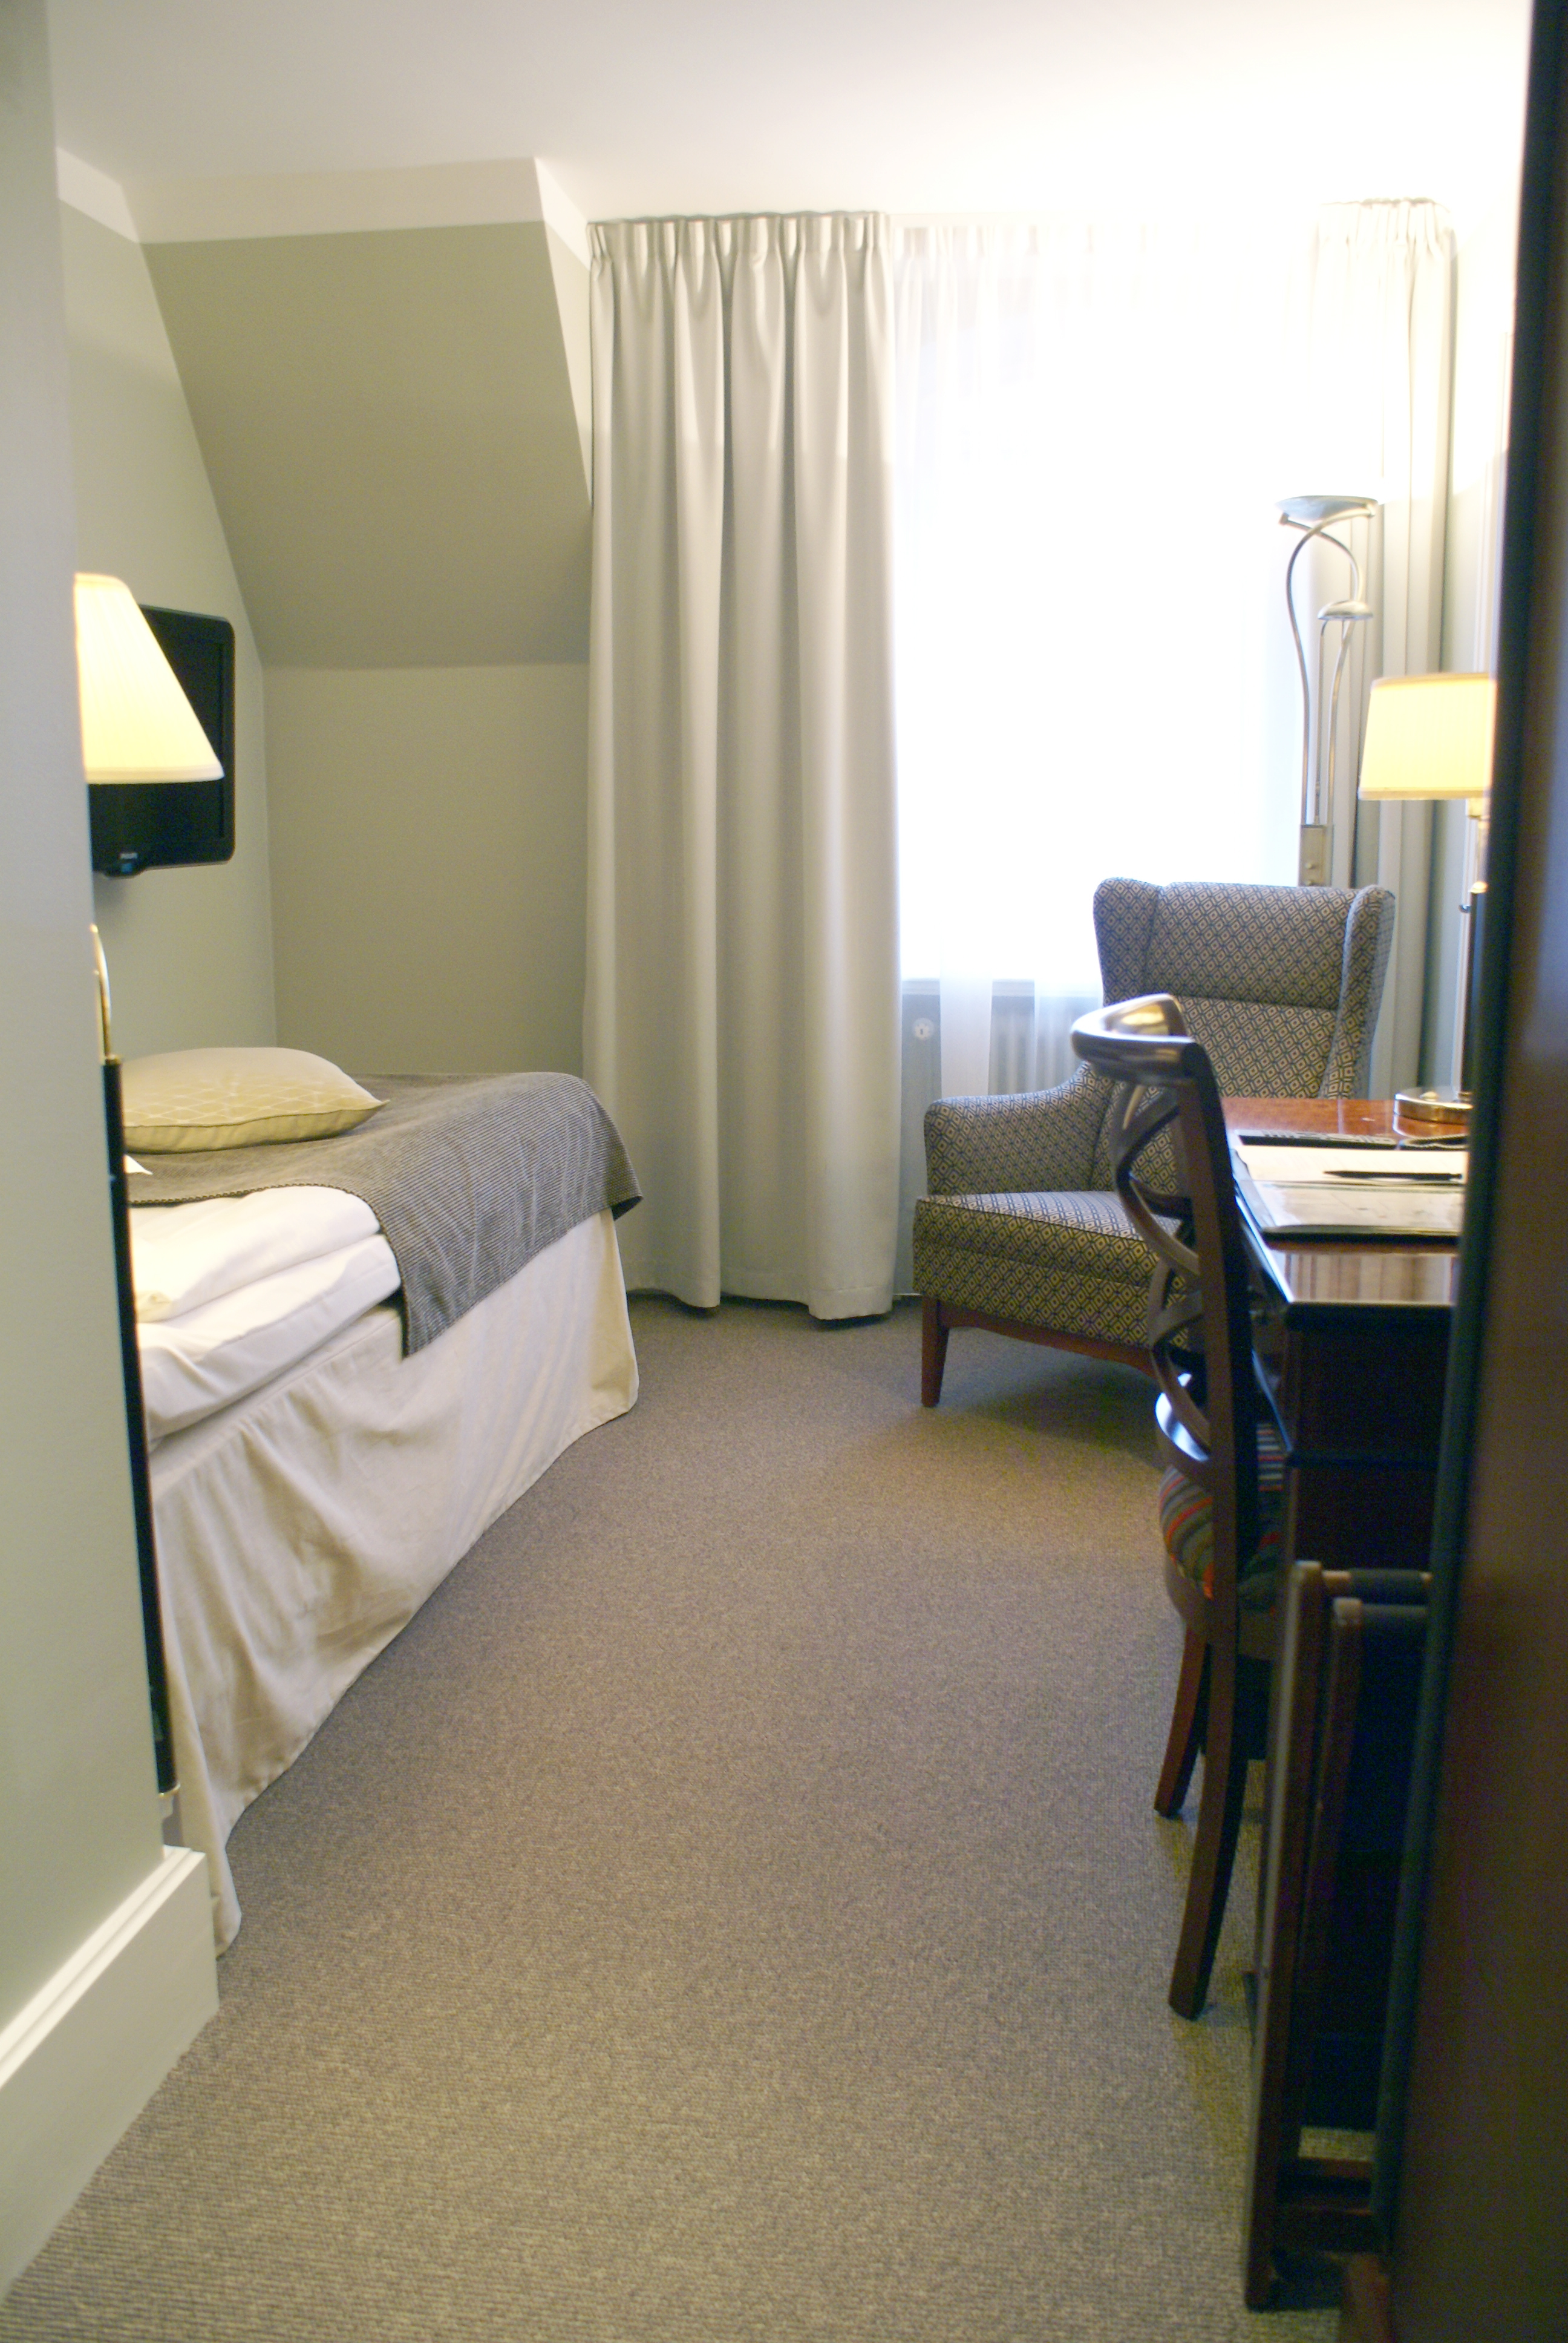 Hotel room with single bed, armchair and desk